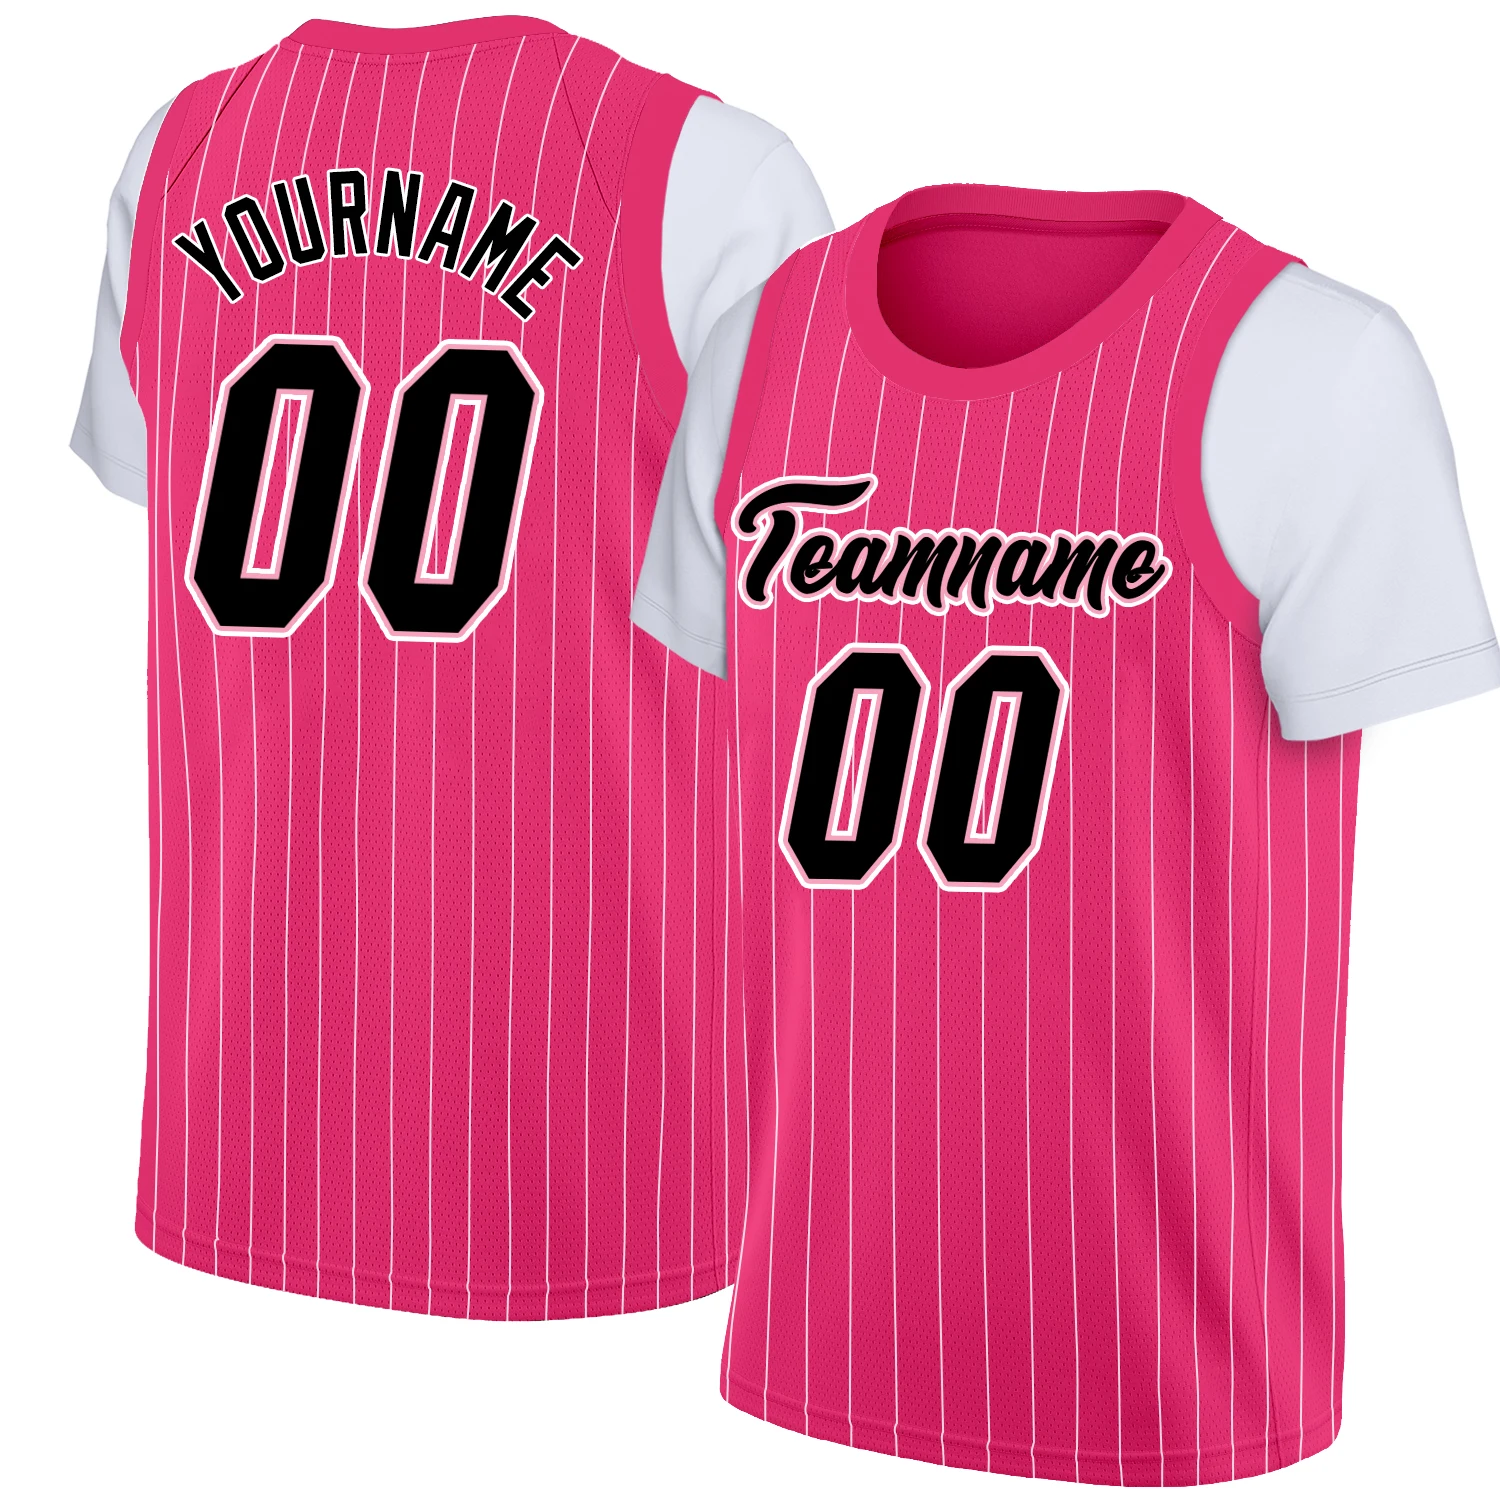 

Custom Basketball Jersey Personalized Print Team Name/Numbers Breathable Soft Comfortable Sleeve Shirts for Adults/Kids Big size